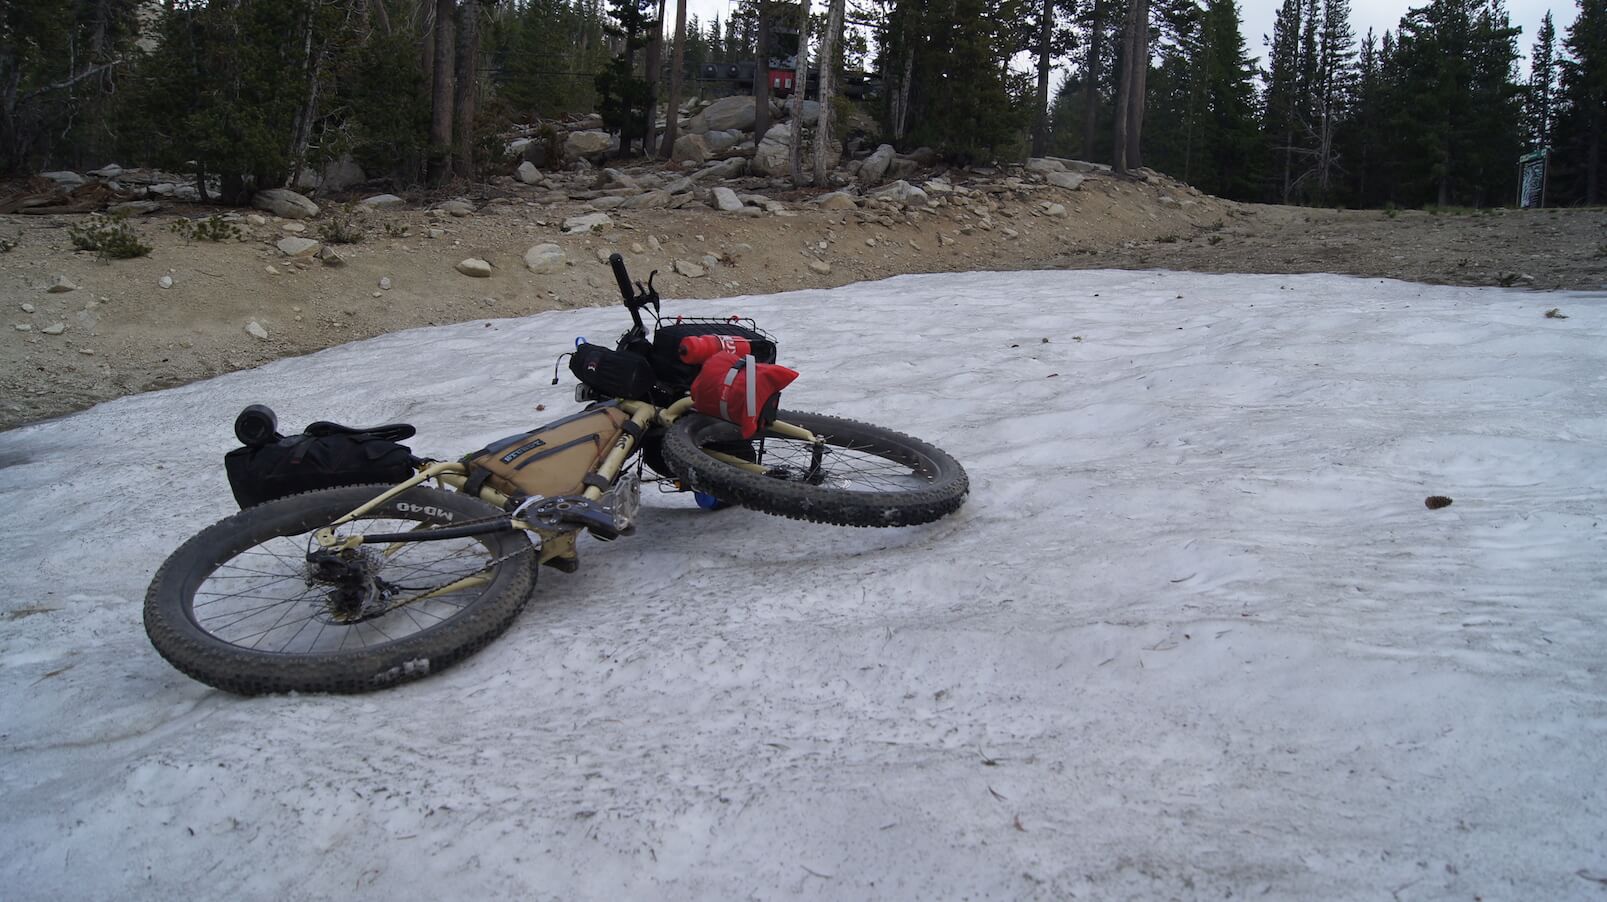 A Surly bike, loaded with gear, laying on a large sheet of ice, in a clearing in the forest